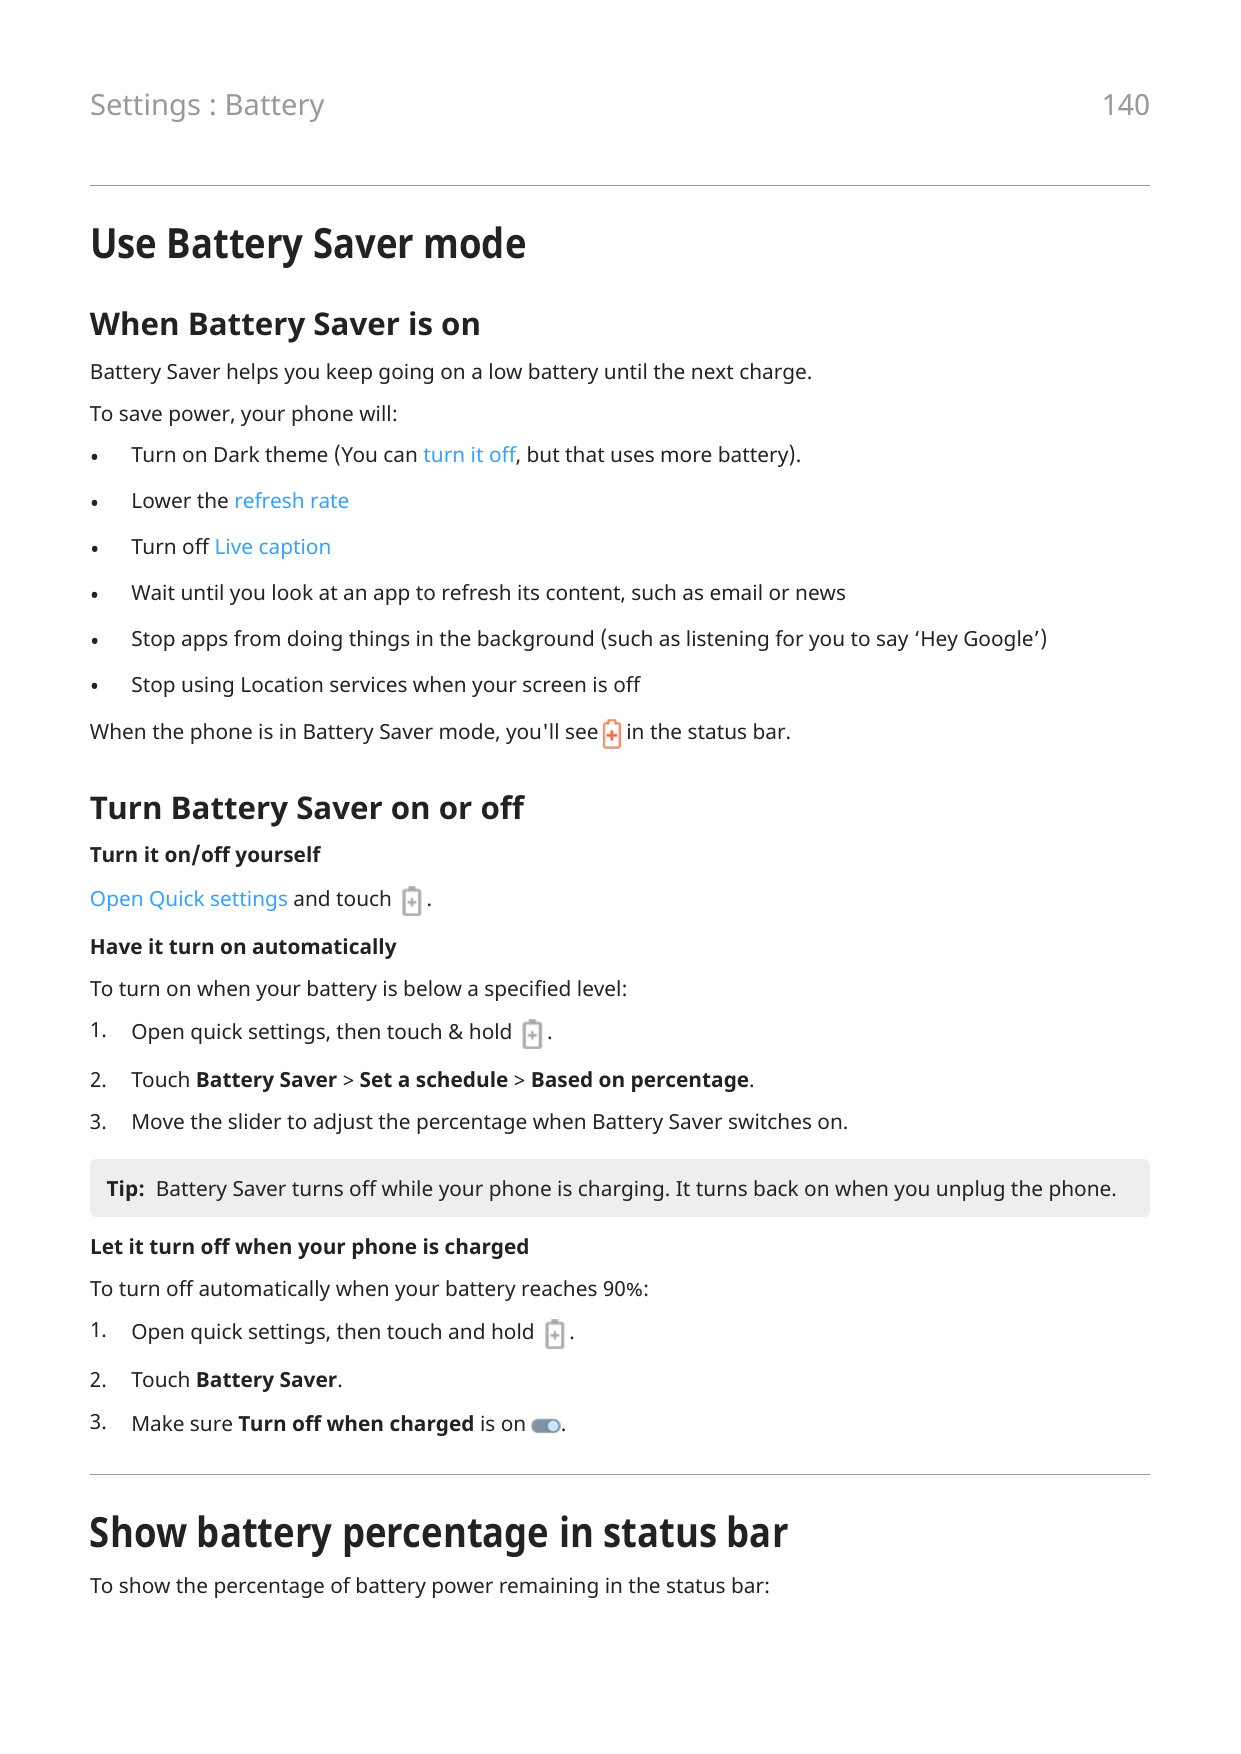 140Settings : BatteryUse Battery Saver modeWhen Battery Saver is onBattery Saver helps you keep going on a low battery until the